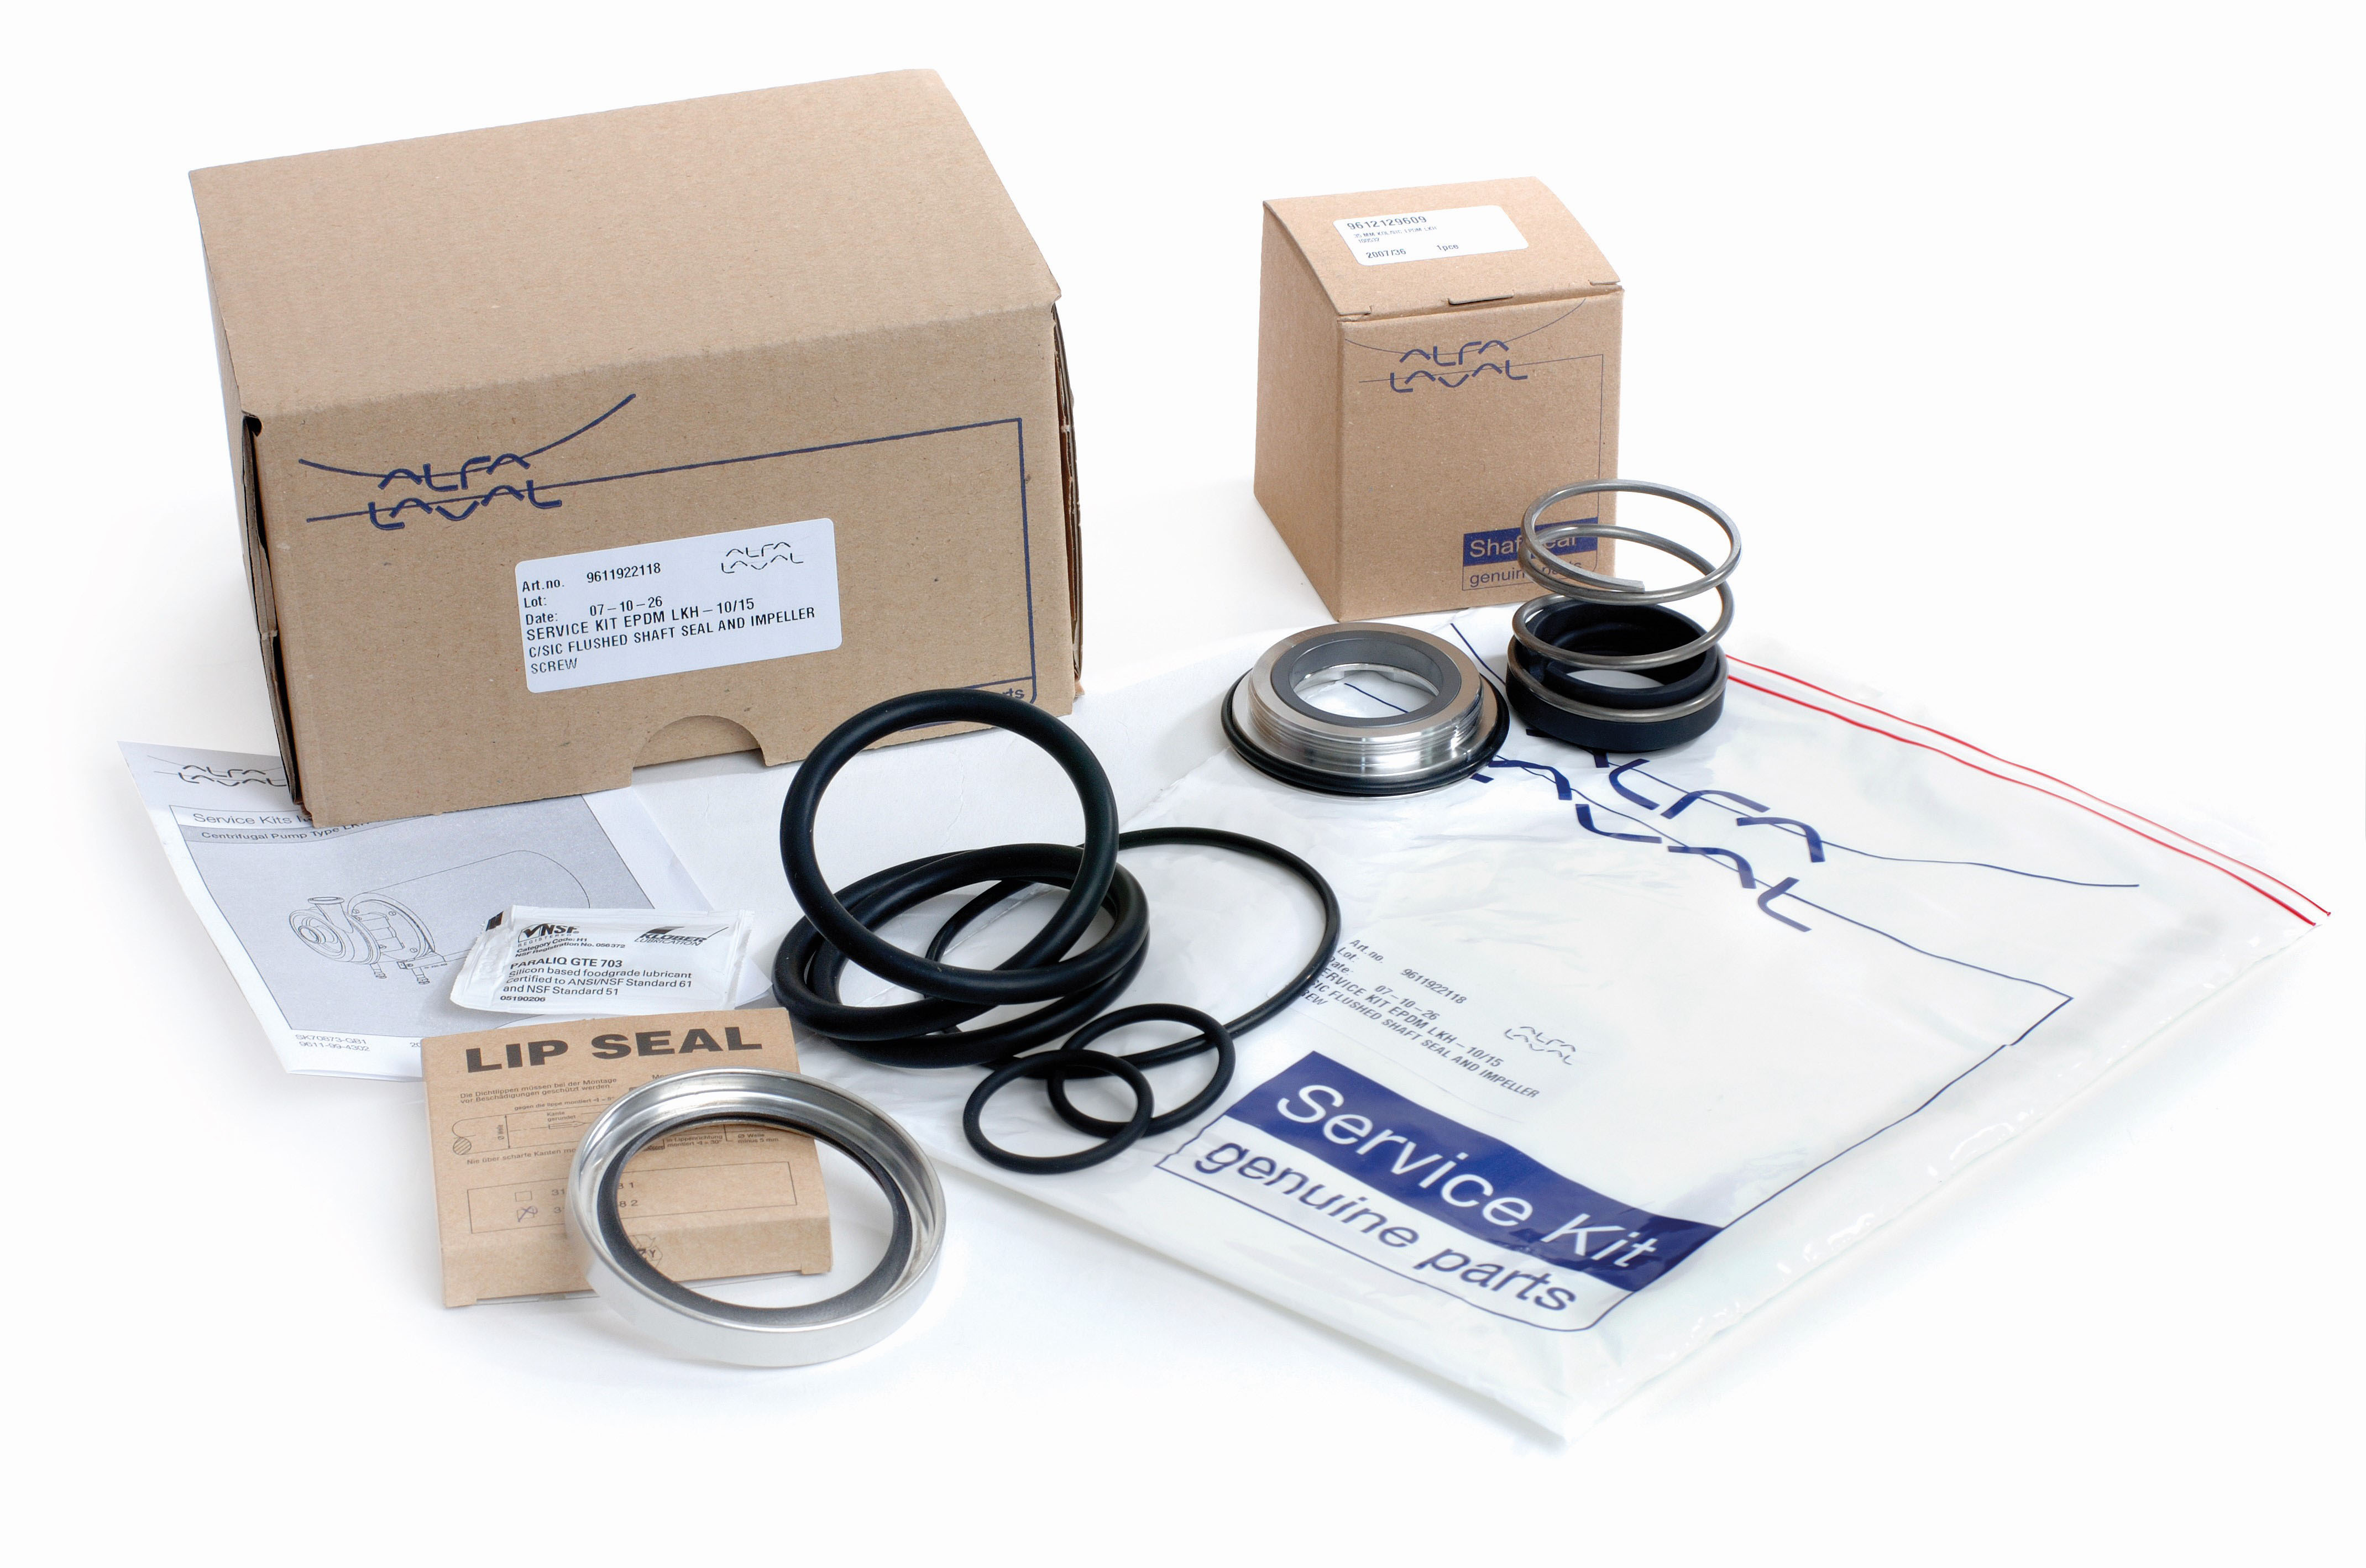 The service kits contain all the necessary spare parts to tackle breakdowns, repairs and scheduled preventive maintenance.